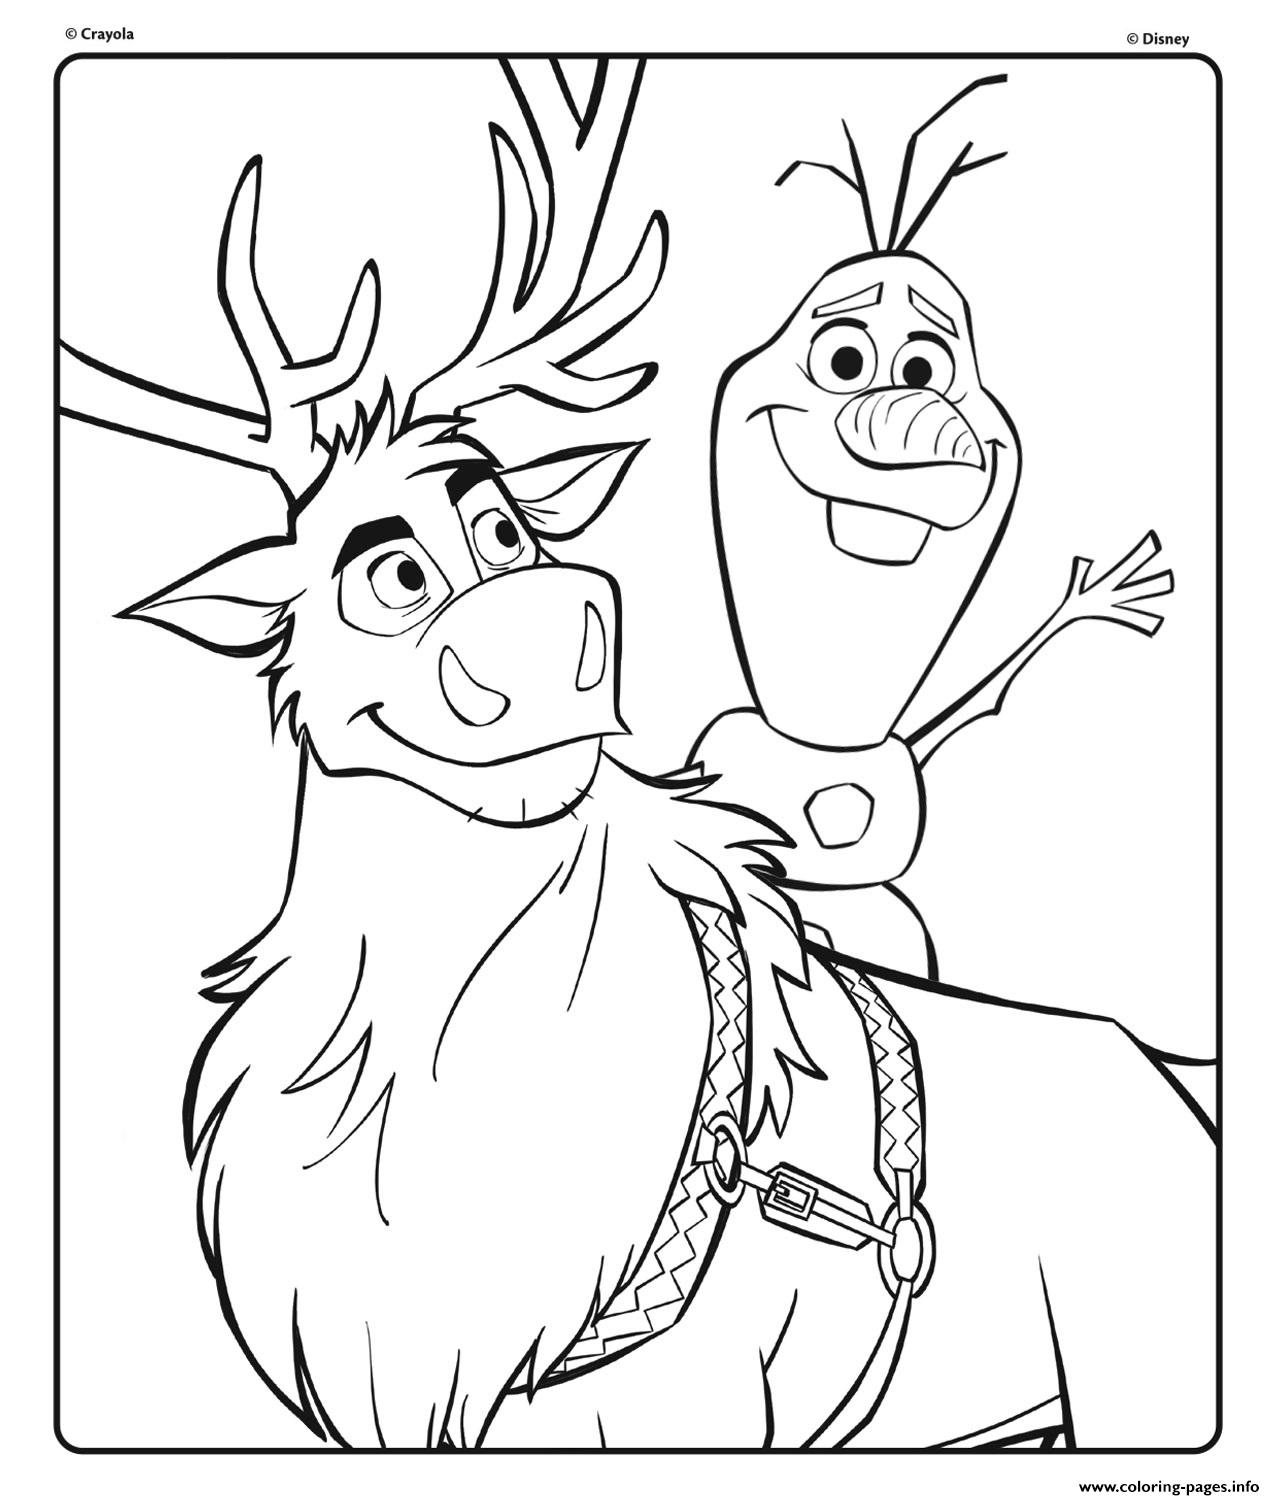 Olaf And Sven From Disney Frozen 2 coloring